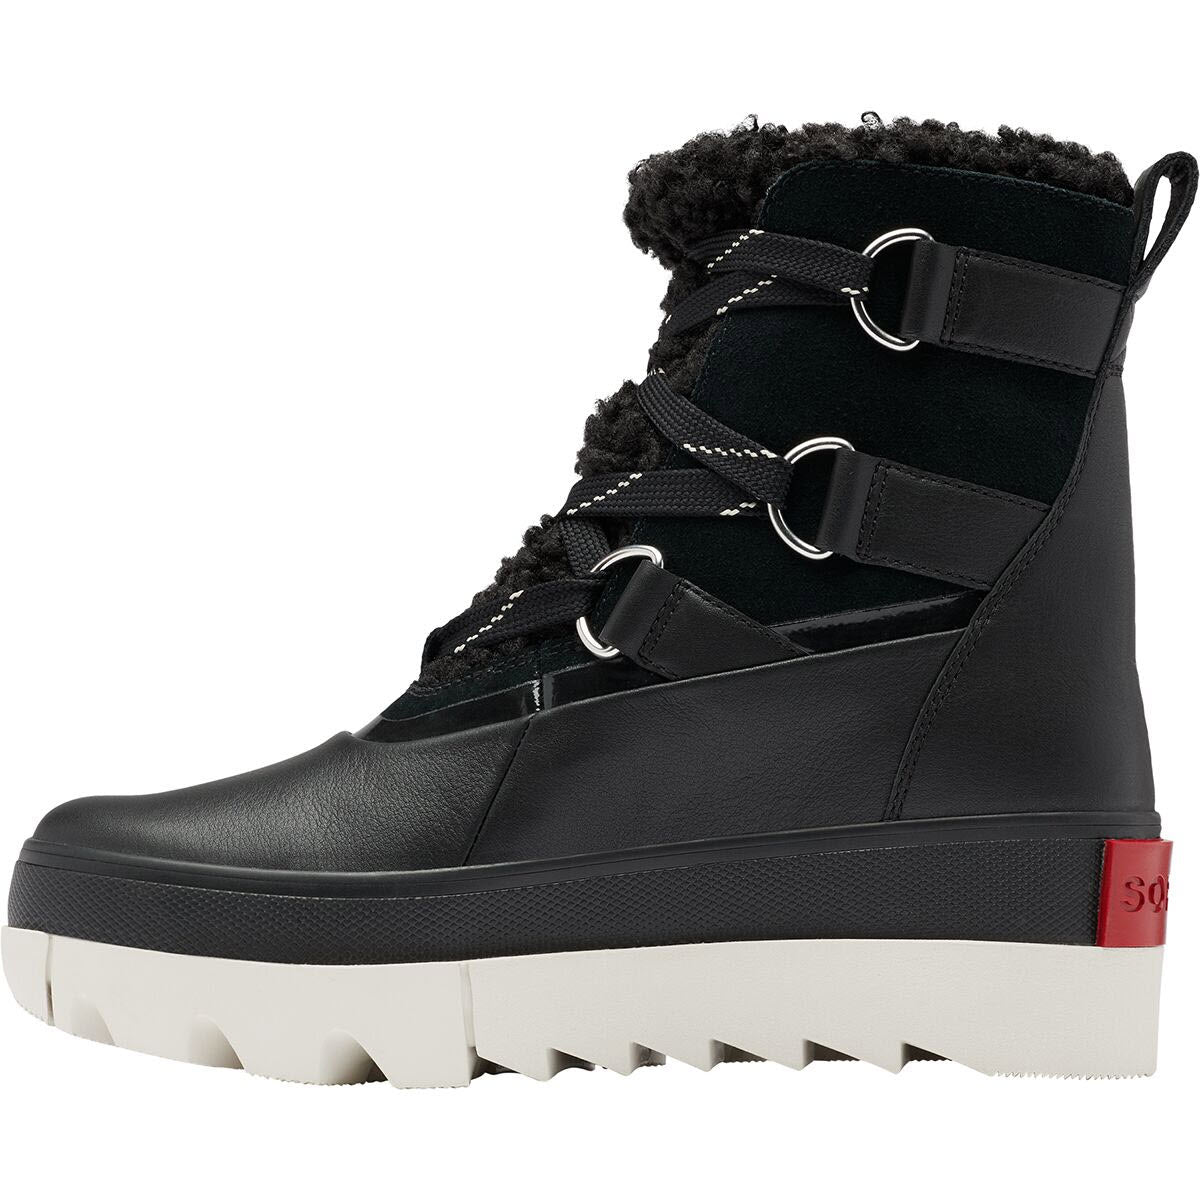 Black leather high-top boot with chunky white high-traction sole and black laces, featuring a plush lining and a small red logo on the heel - Sorel Joan of Arctic Next Boot Black - Womens.